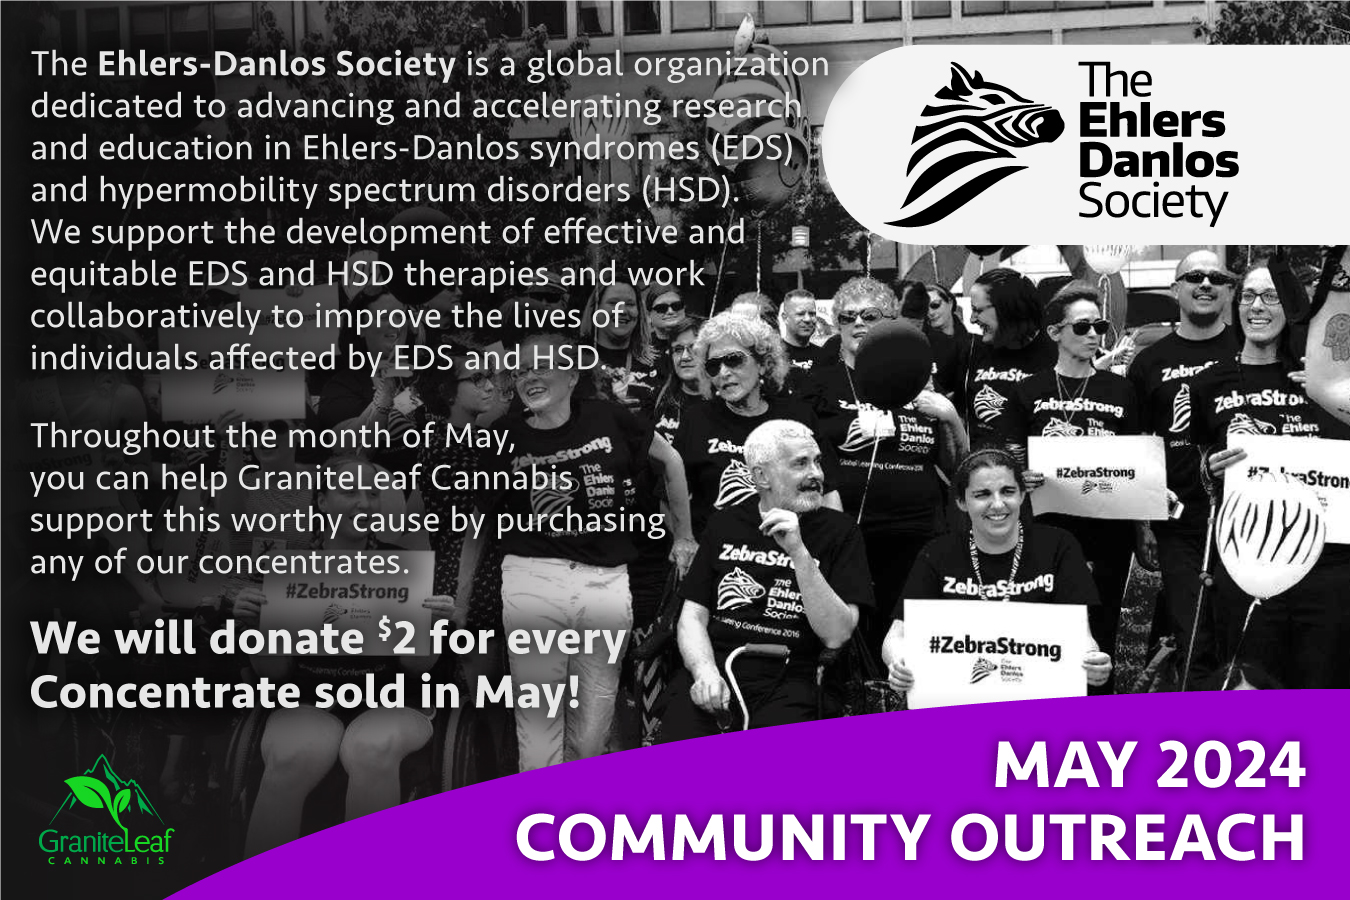 Ehlers Danlos Society May 2024 Community Outreach